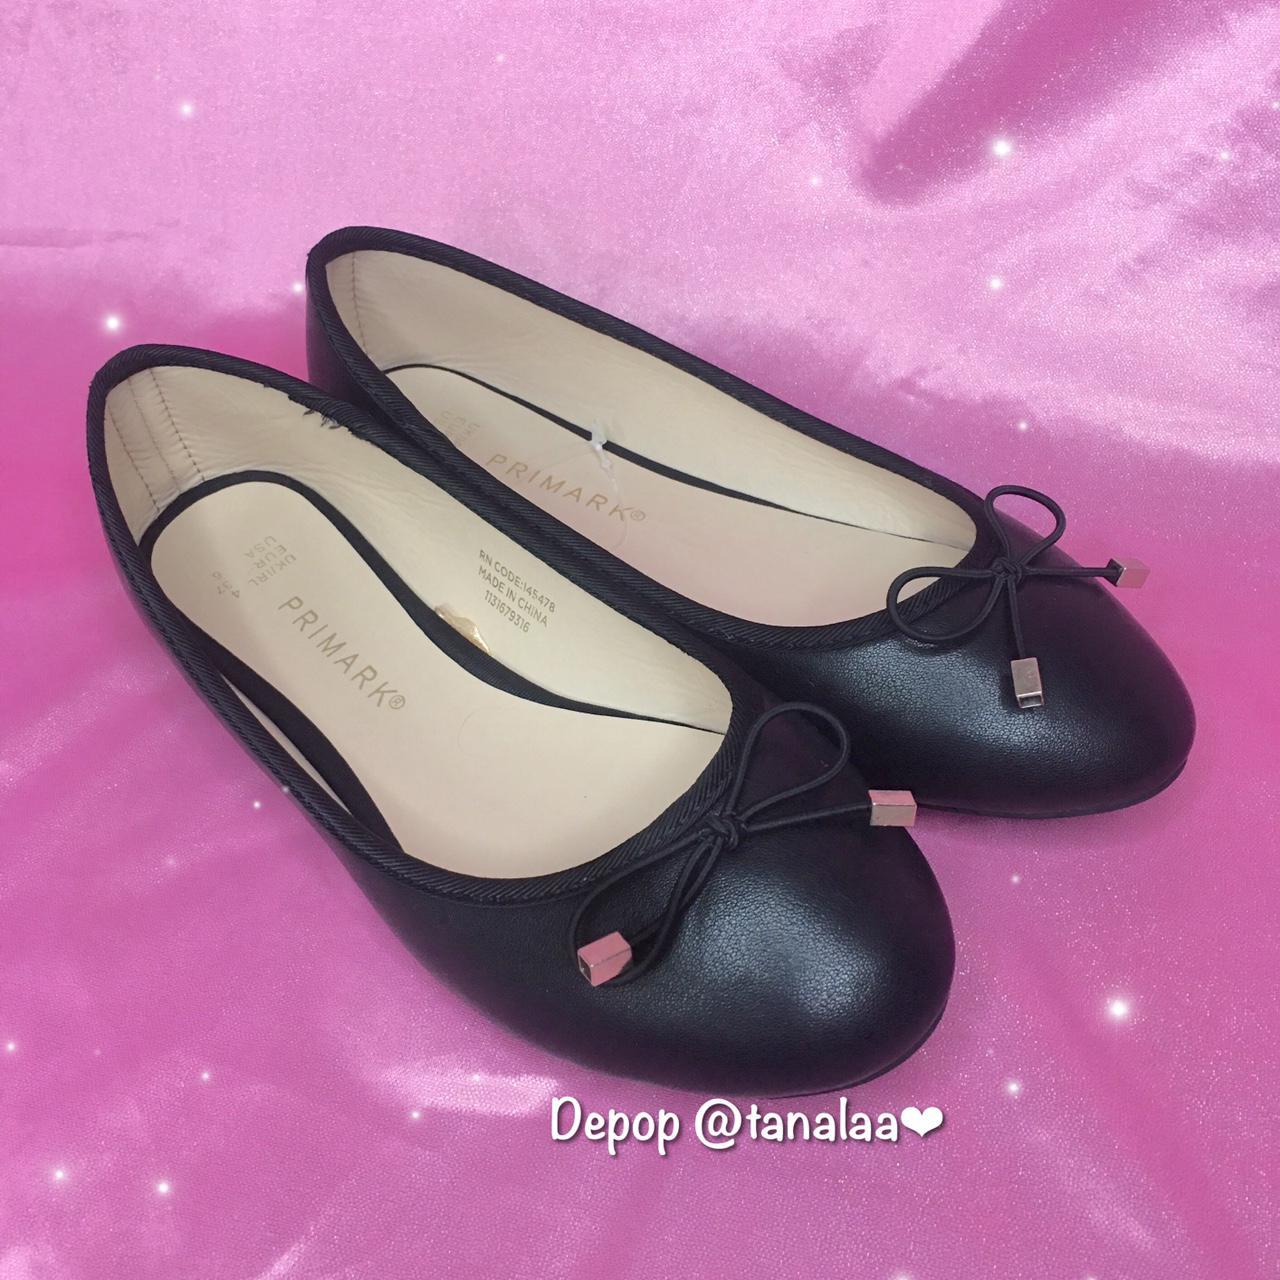 Product Image 2 - Black Ballet Flats🖤✨
Size 4
Only worn